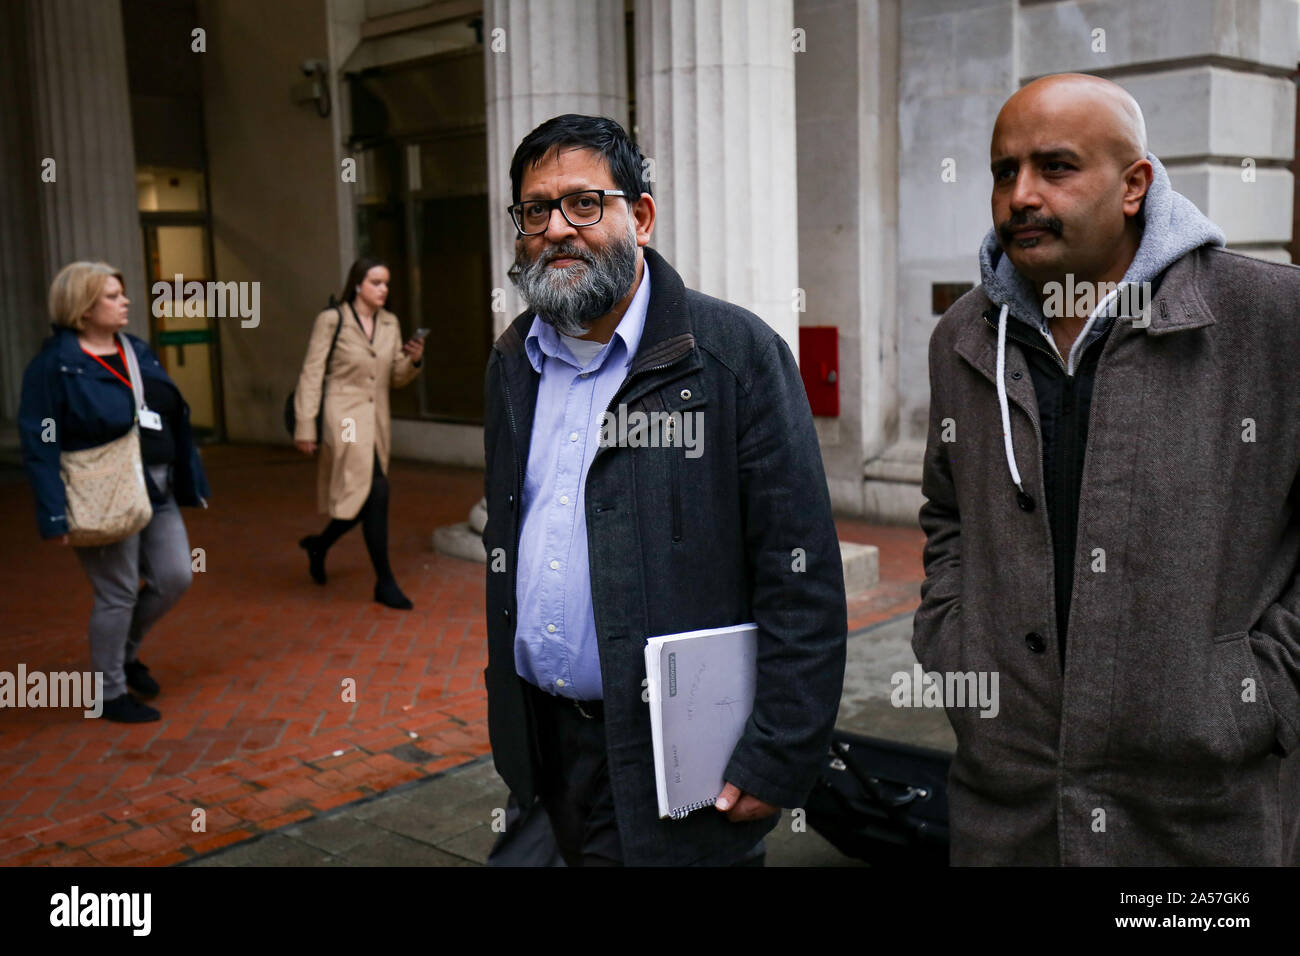 Protest group member Amir Ahmed leaving Birmingham's Civil Justice Centre after a judge reserved his decision on an application to keep a protest exclusion zone around Bimringham's Anderton Park Primary School. Stock Photo